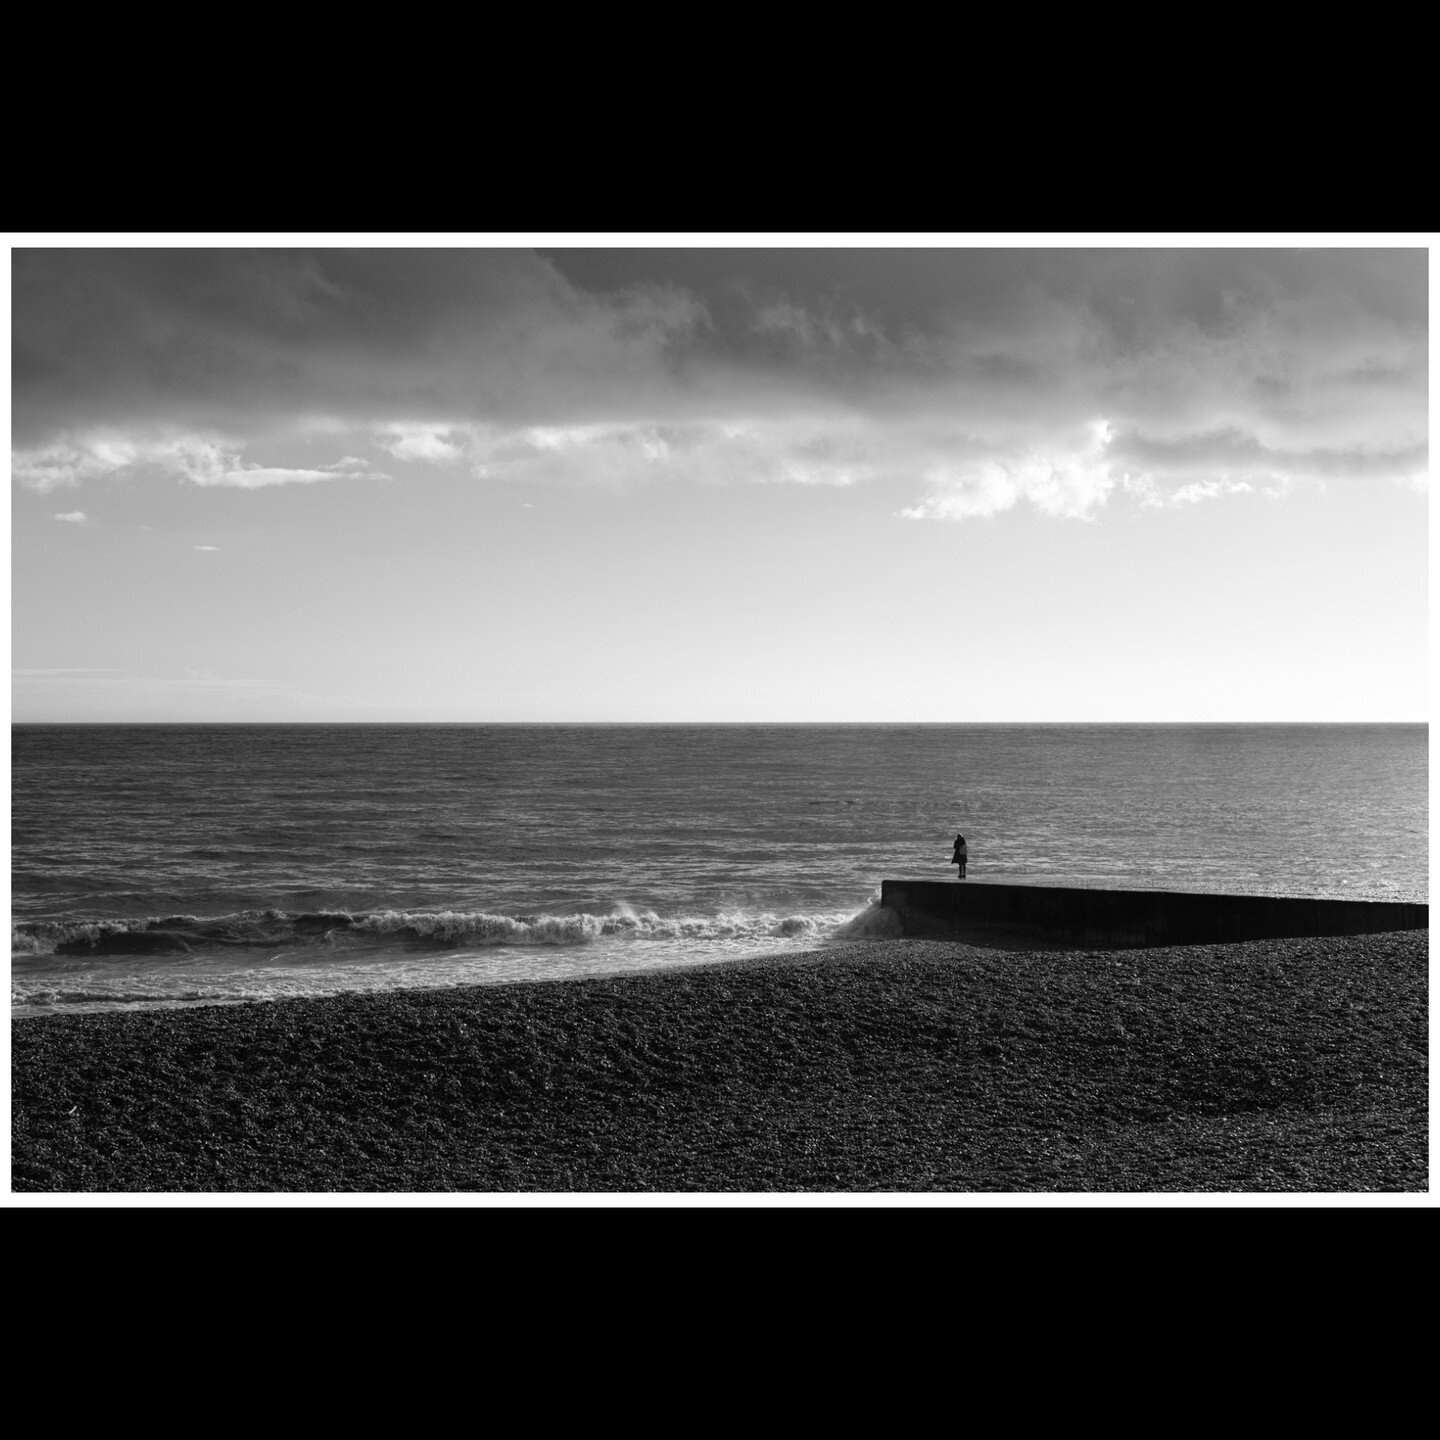 One of three from St Leonards &amp; Hastings' beach taken last weekend during a brief jaunt to the coast. This photo was taken without any neutral density filters.

#coastalphotography #landscapephotography #britishcoast #hastings #stleonards #fujifi